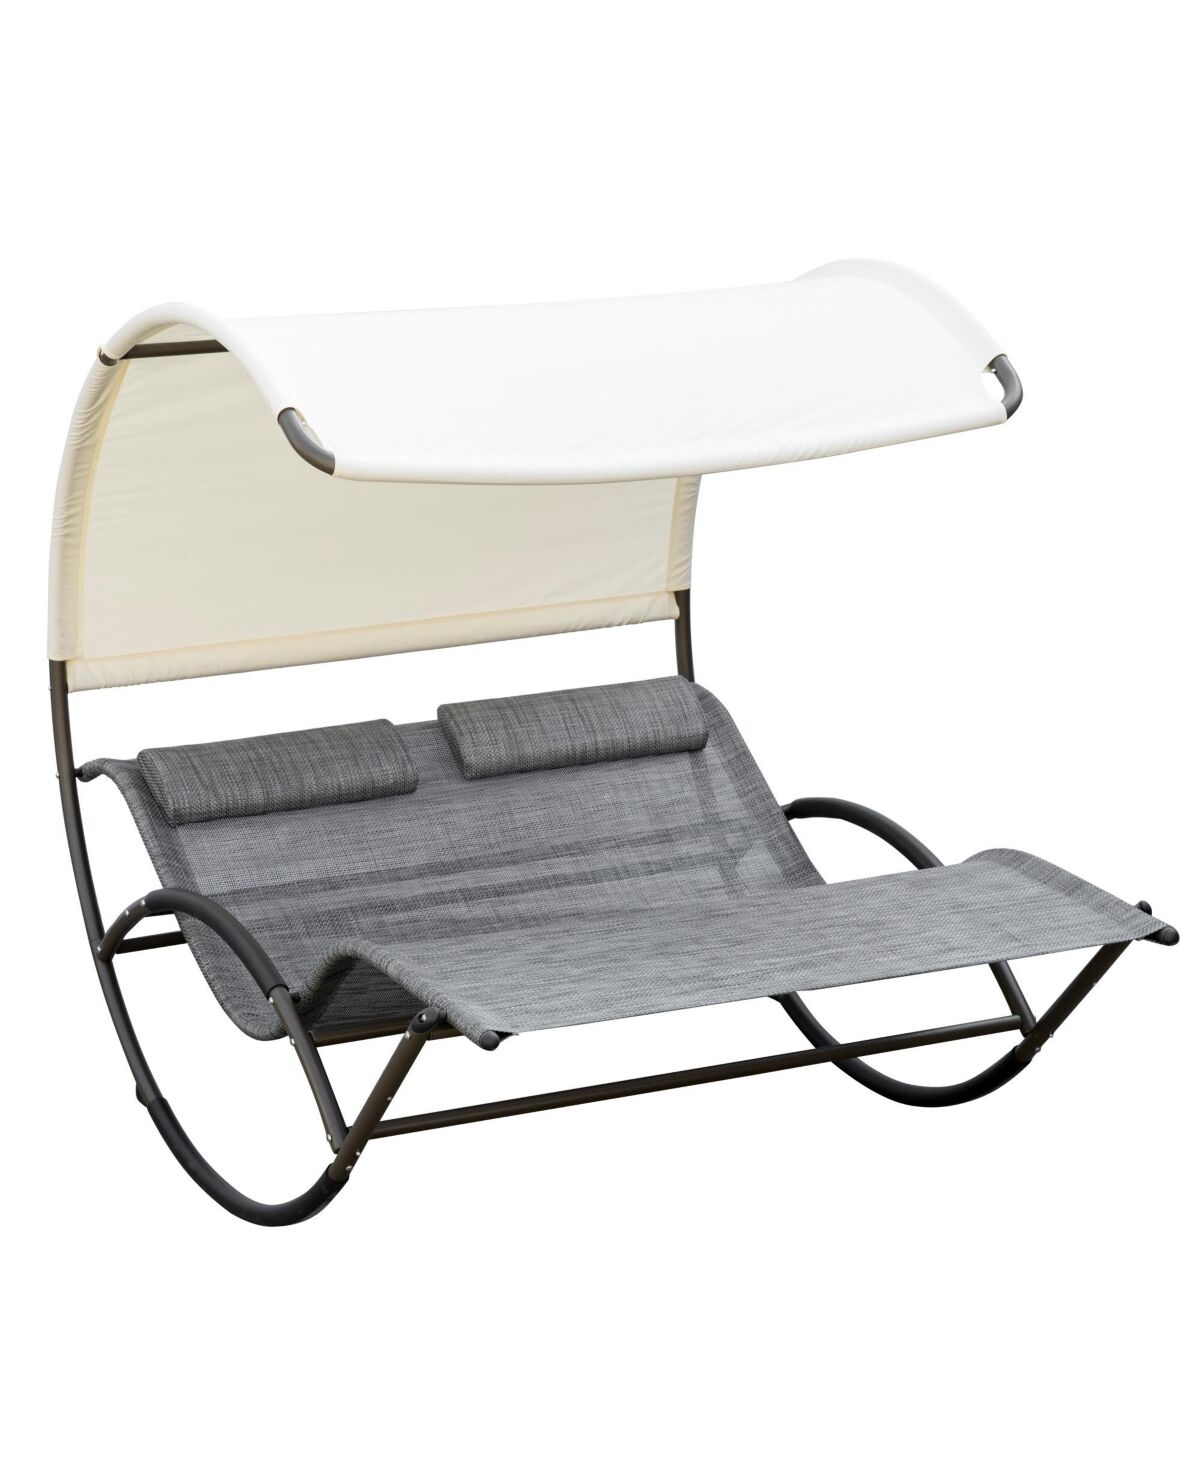 Outsunny Outdoor Double Chaise Rocking Chair, Day Bed Sun Lounger with Canopy Shade, Headrest Pillow, Armrests for Garden, Poolside, Light Gray - Ligh